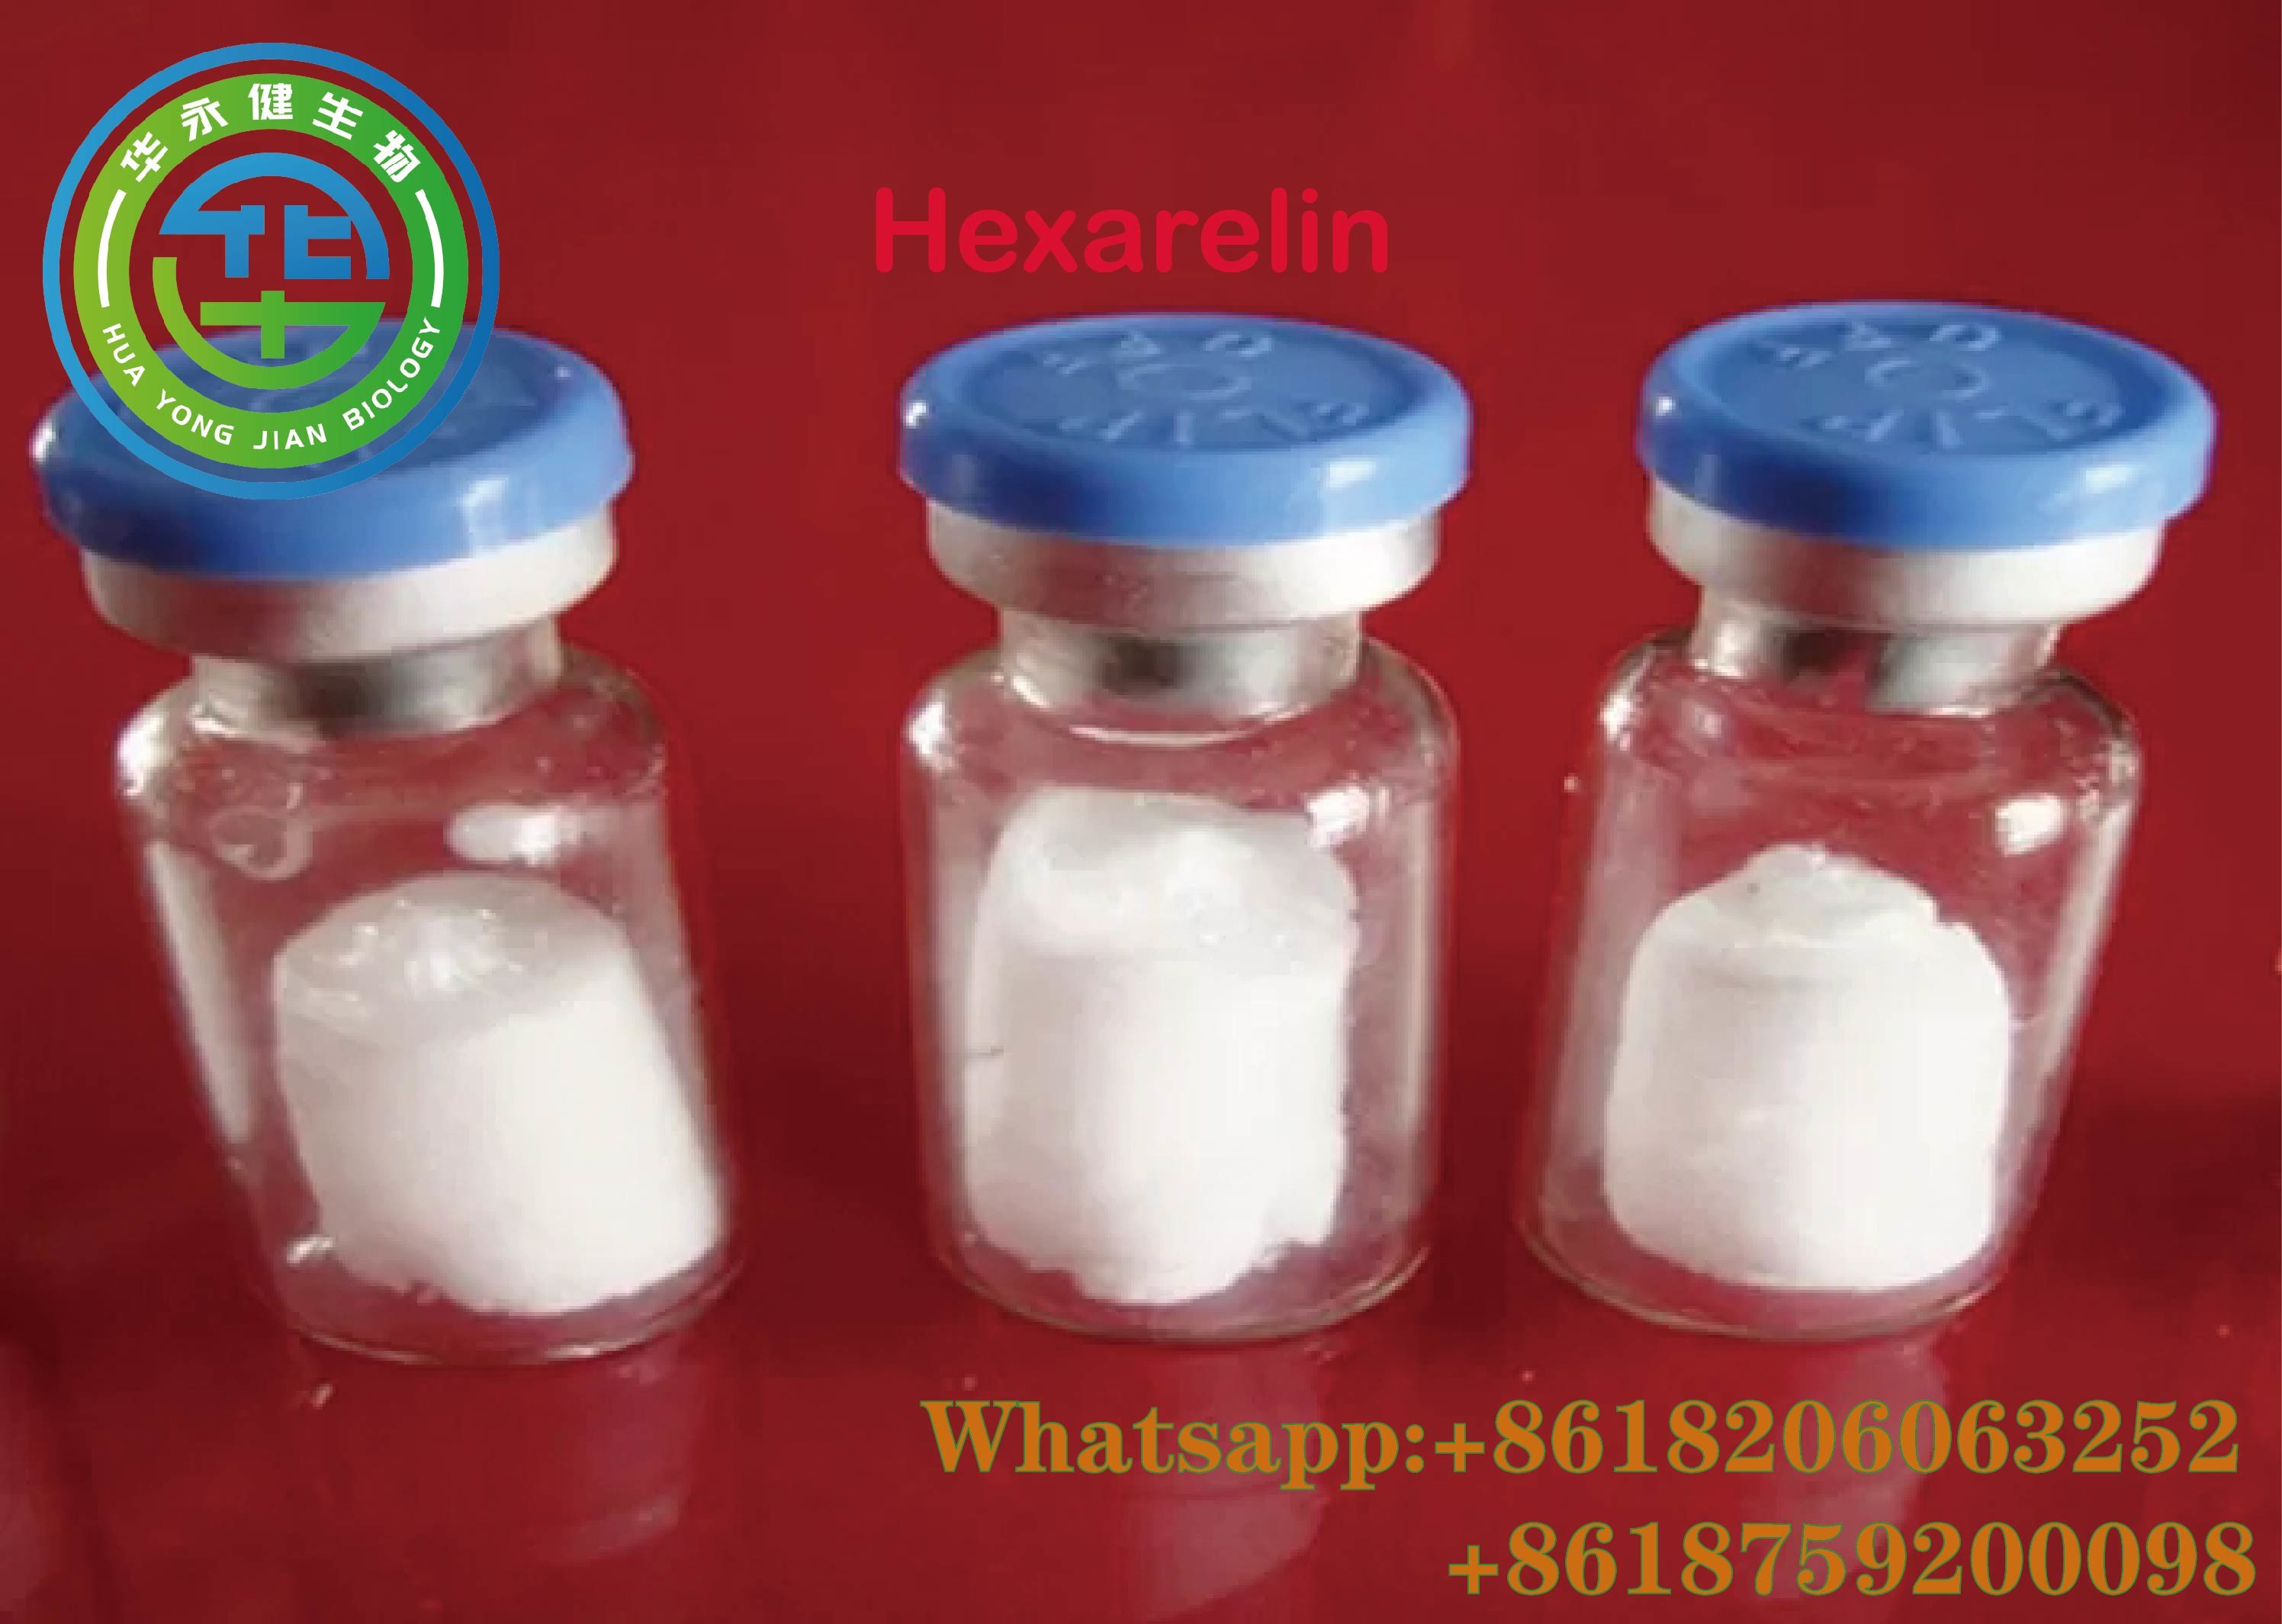 Wholesale Bio Peptide Hexarelin Bodybuilding 2mg Vial Stimulating Gh Secretion CAS 140703-51-1 from china suppliers